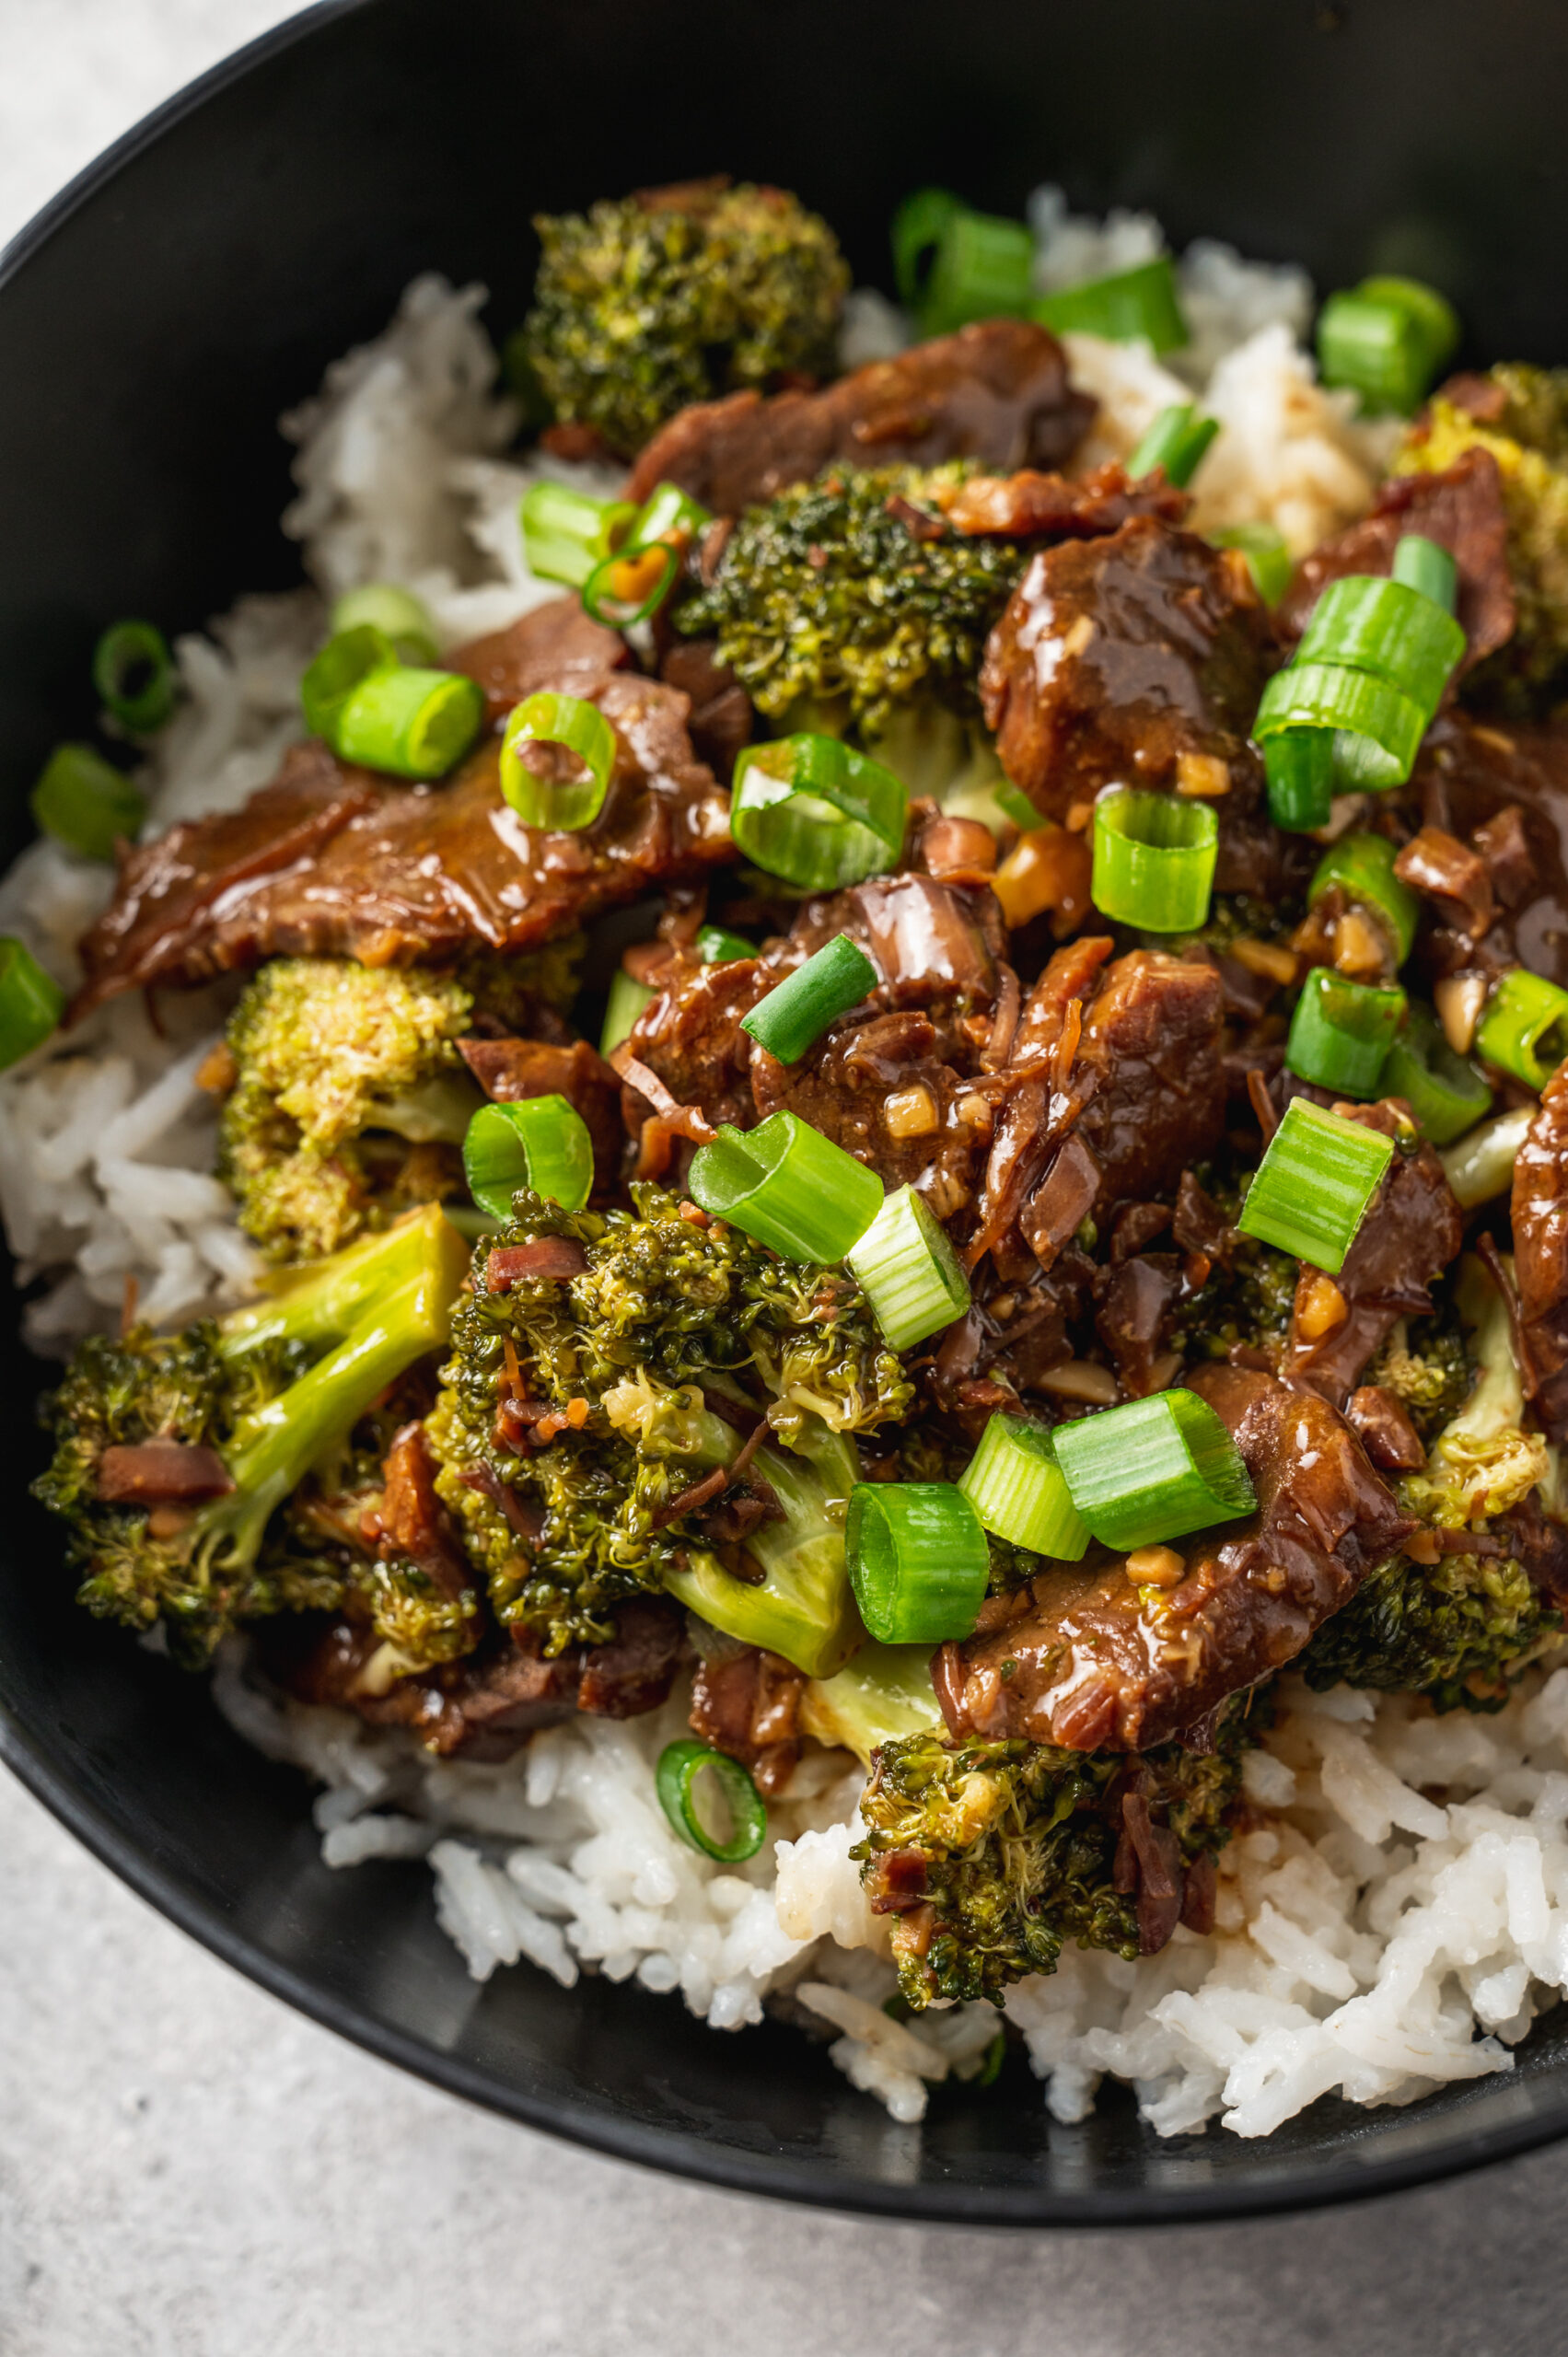 Slow Cooker Beef & Broccoli - Made It. Ate It. Loved It.